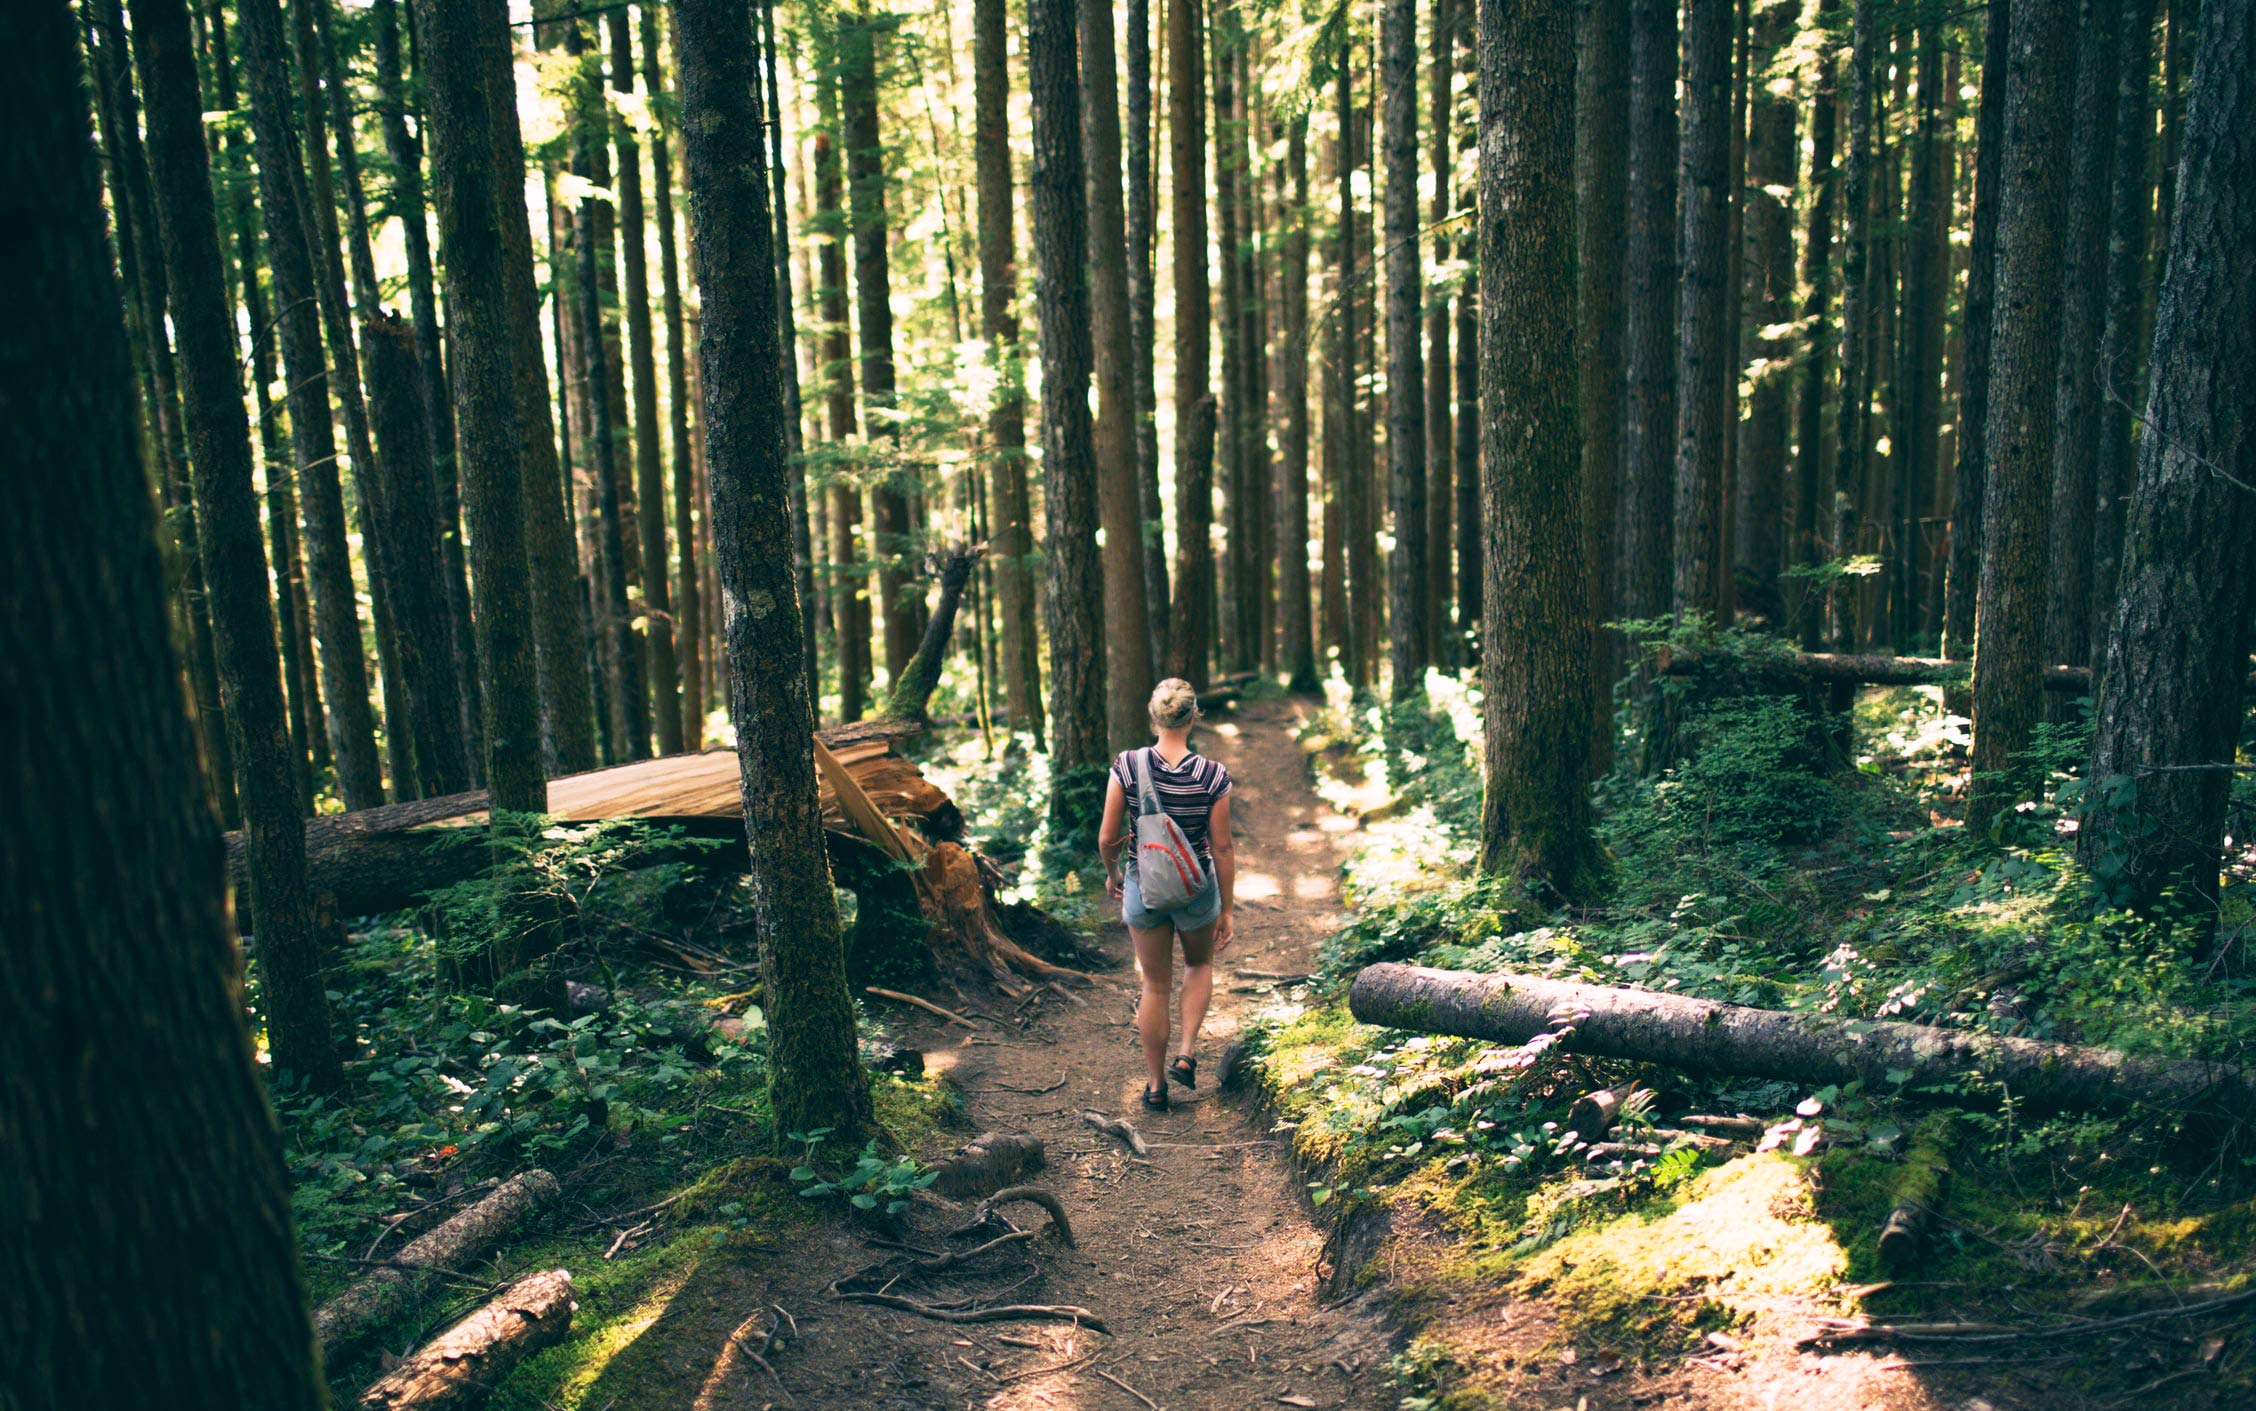 A woman hiking in the forest.